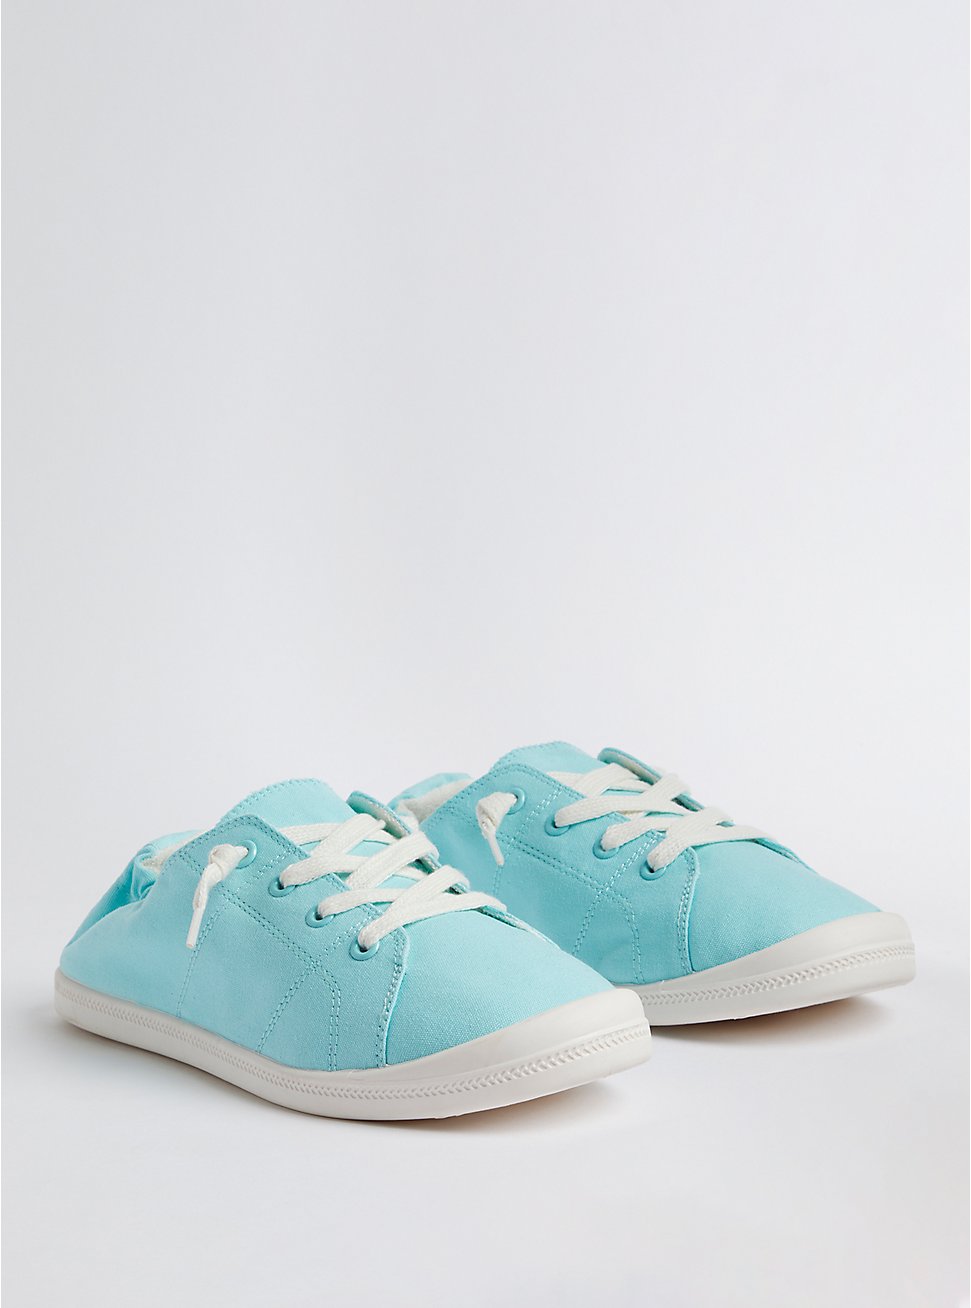 Canvas Ruched Sneaker - Blue (WW), BLUE, hi-res